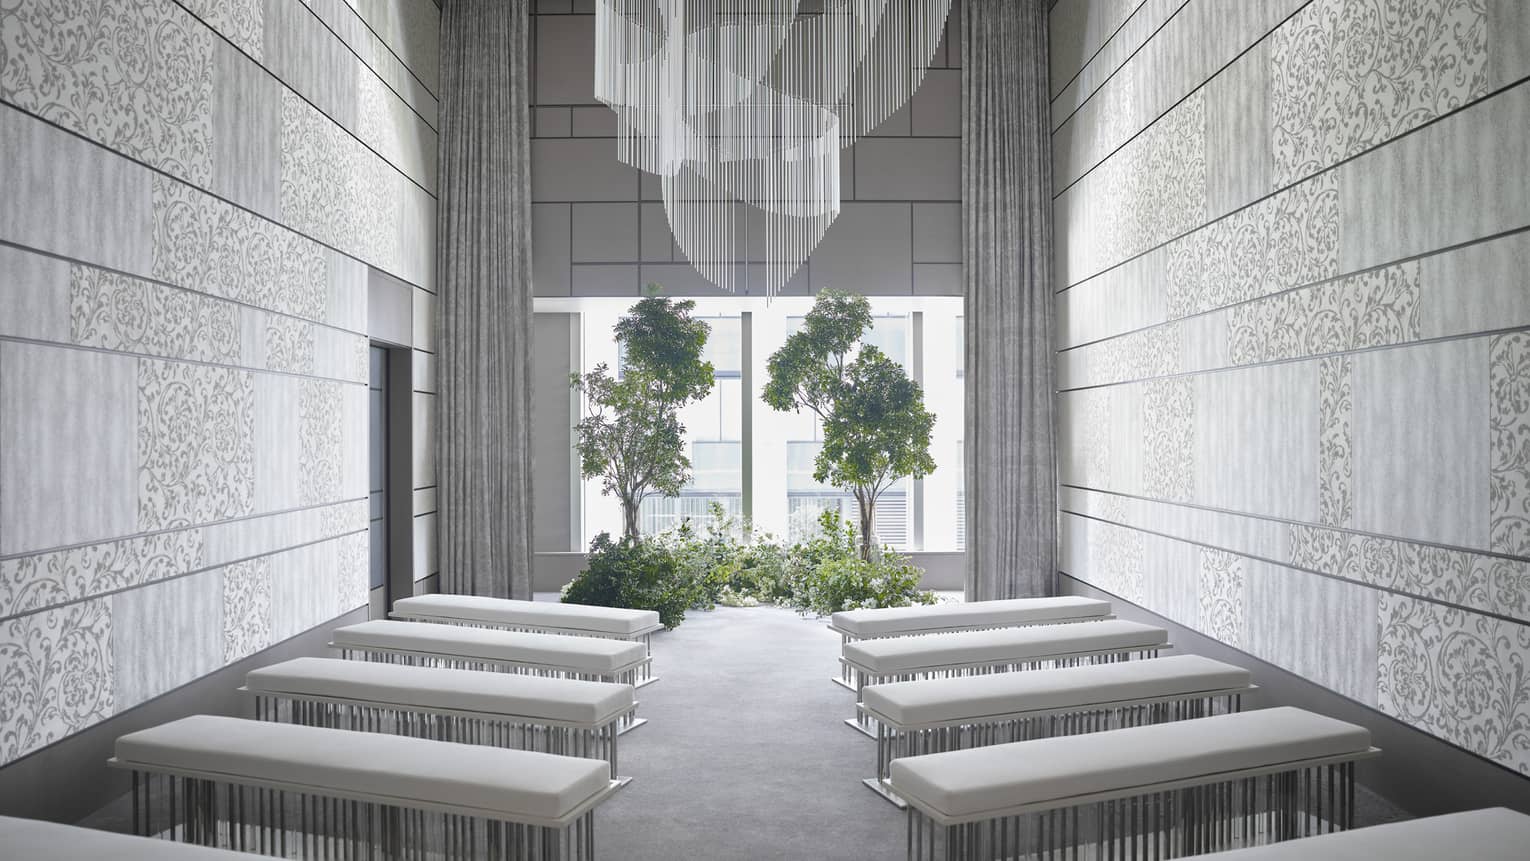 Modern event room, rows of plush benches face window and potted trees